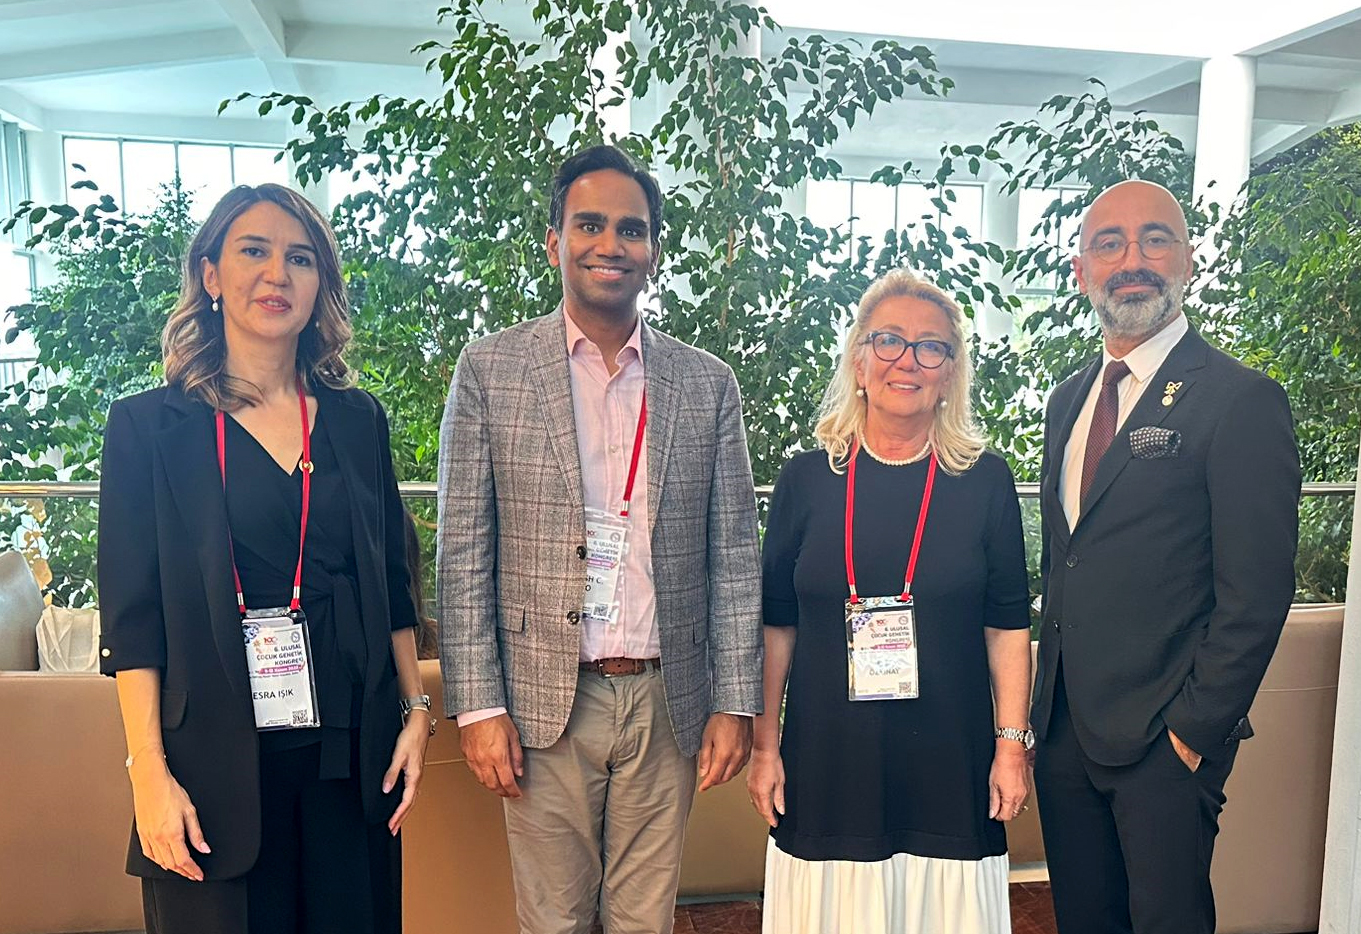 Dr. Rao with his Ege University colleagues, from left Esra Isik, Rao, Ferda Ozkinay, and Tahir Atik.